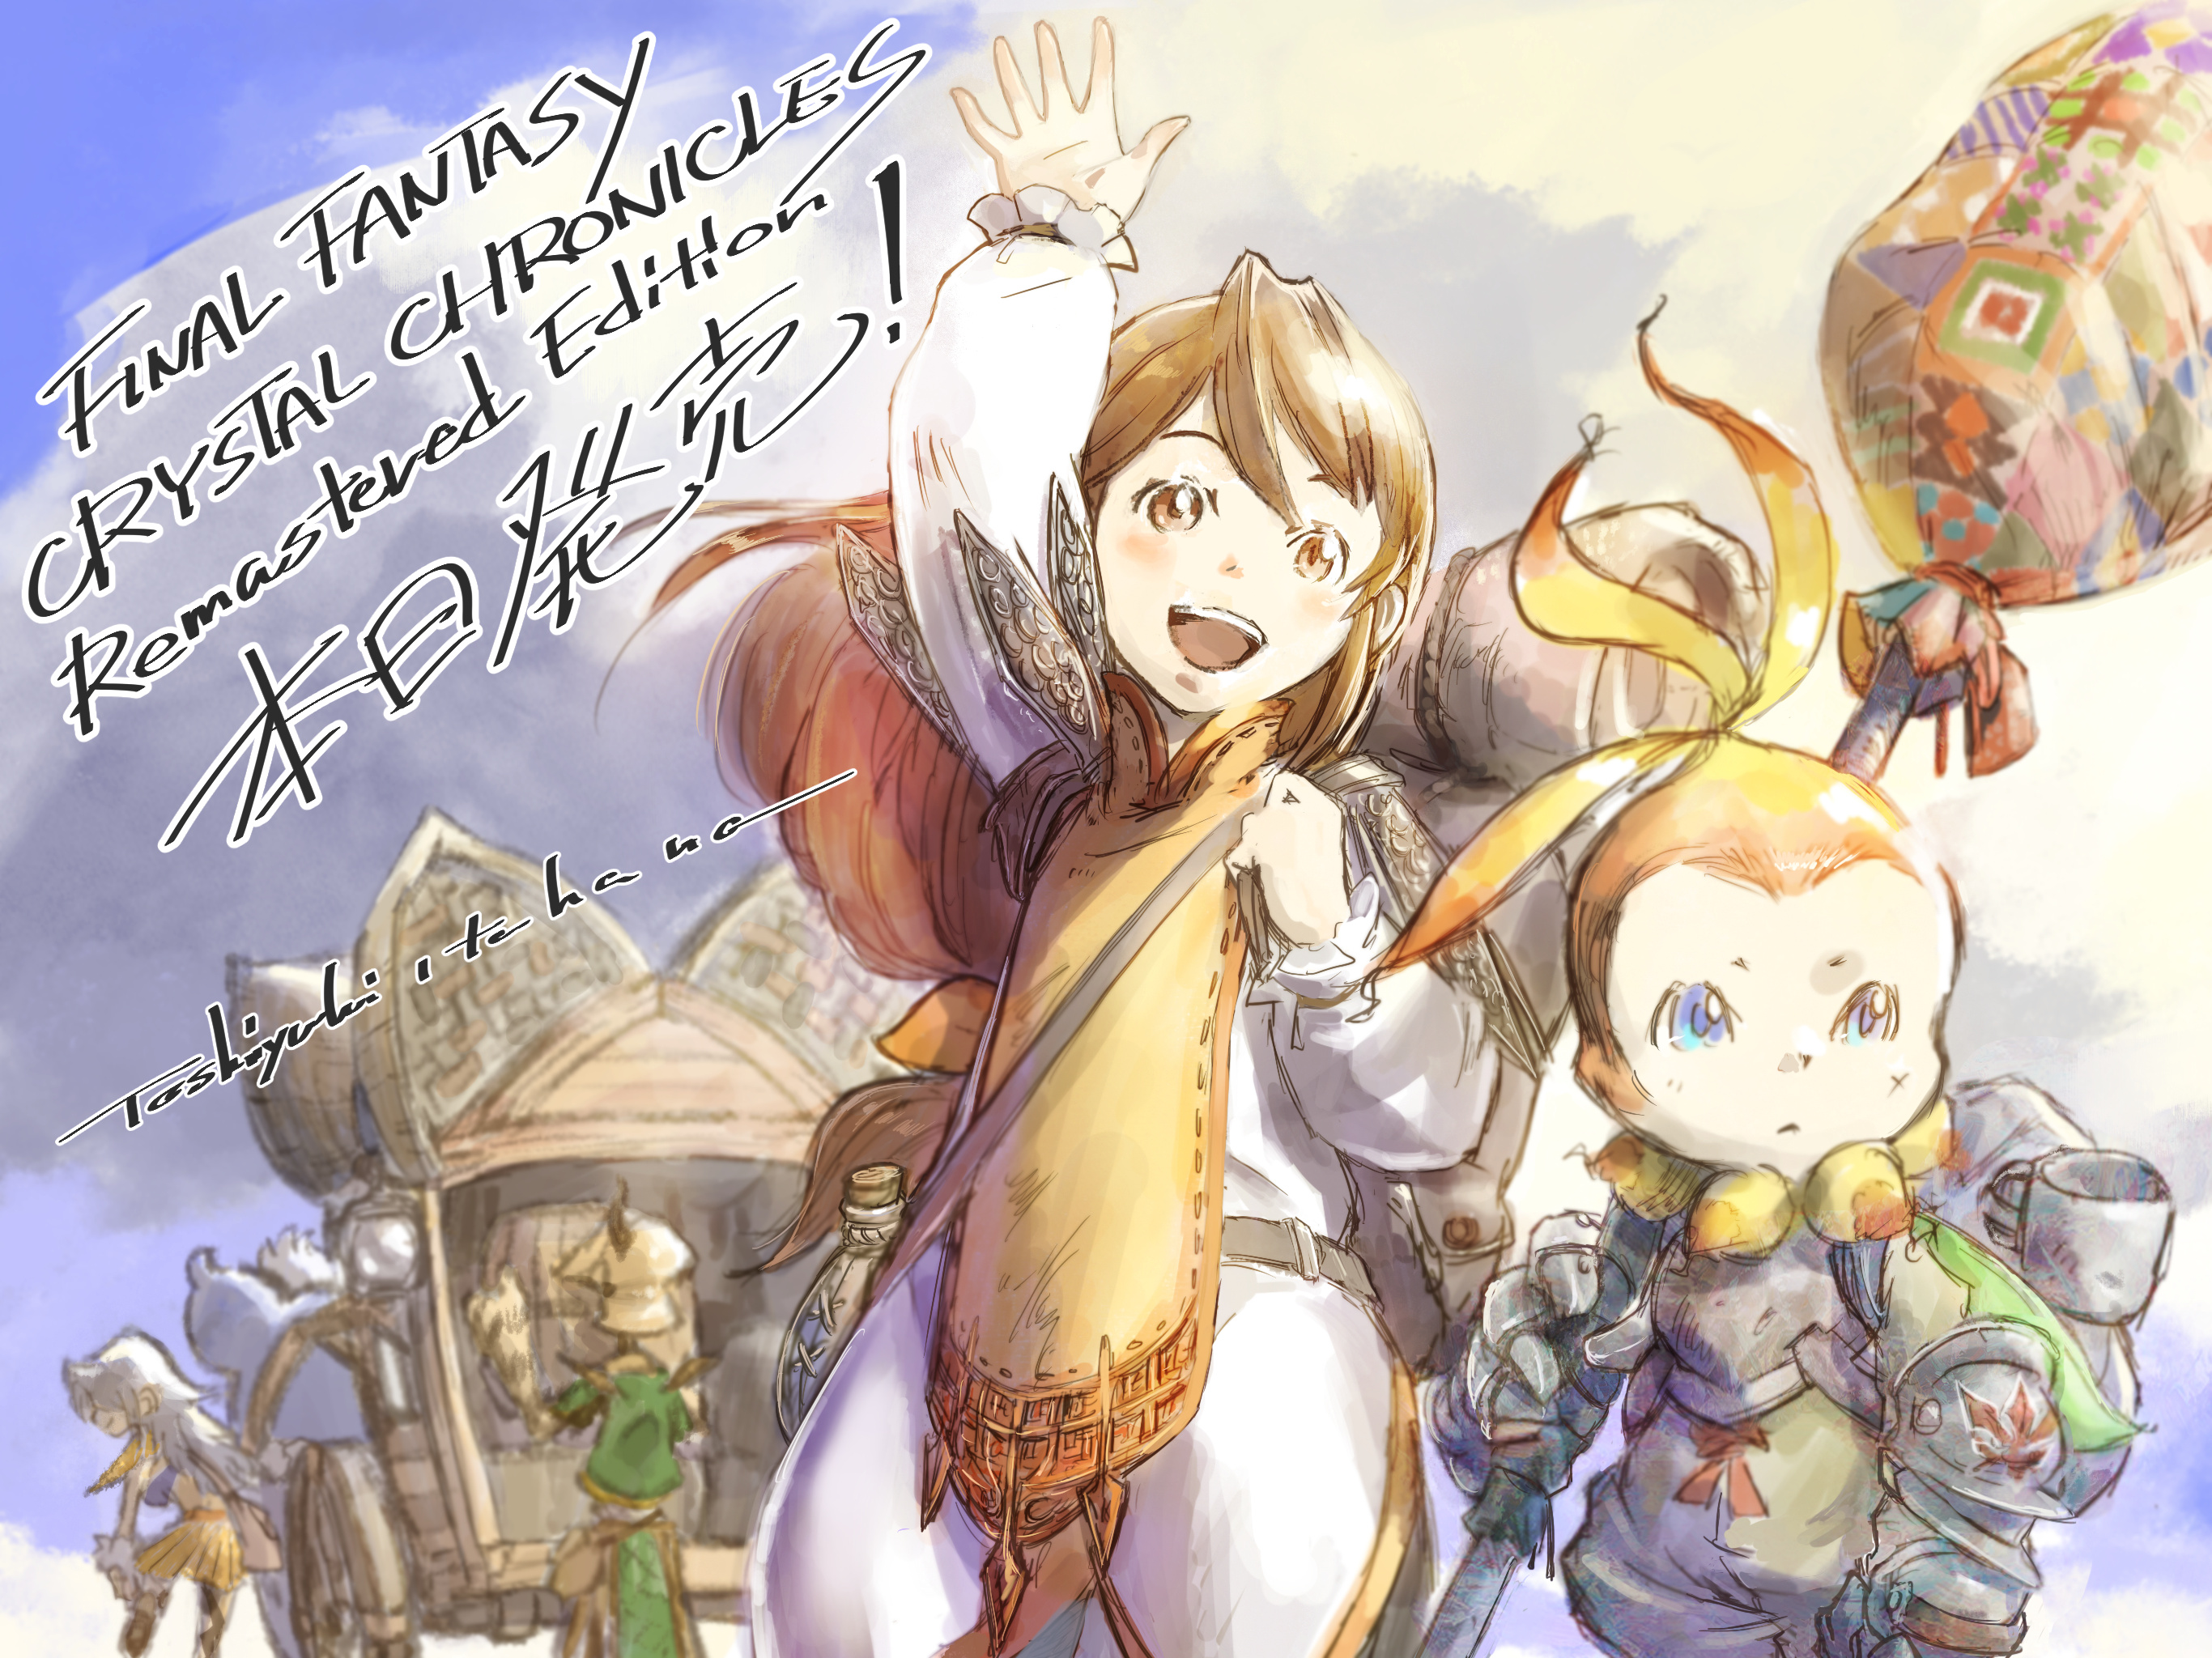 Square Enix Shares A Special Piece Of Art To Celebrate Final Fantasy Crystal Chronicles